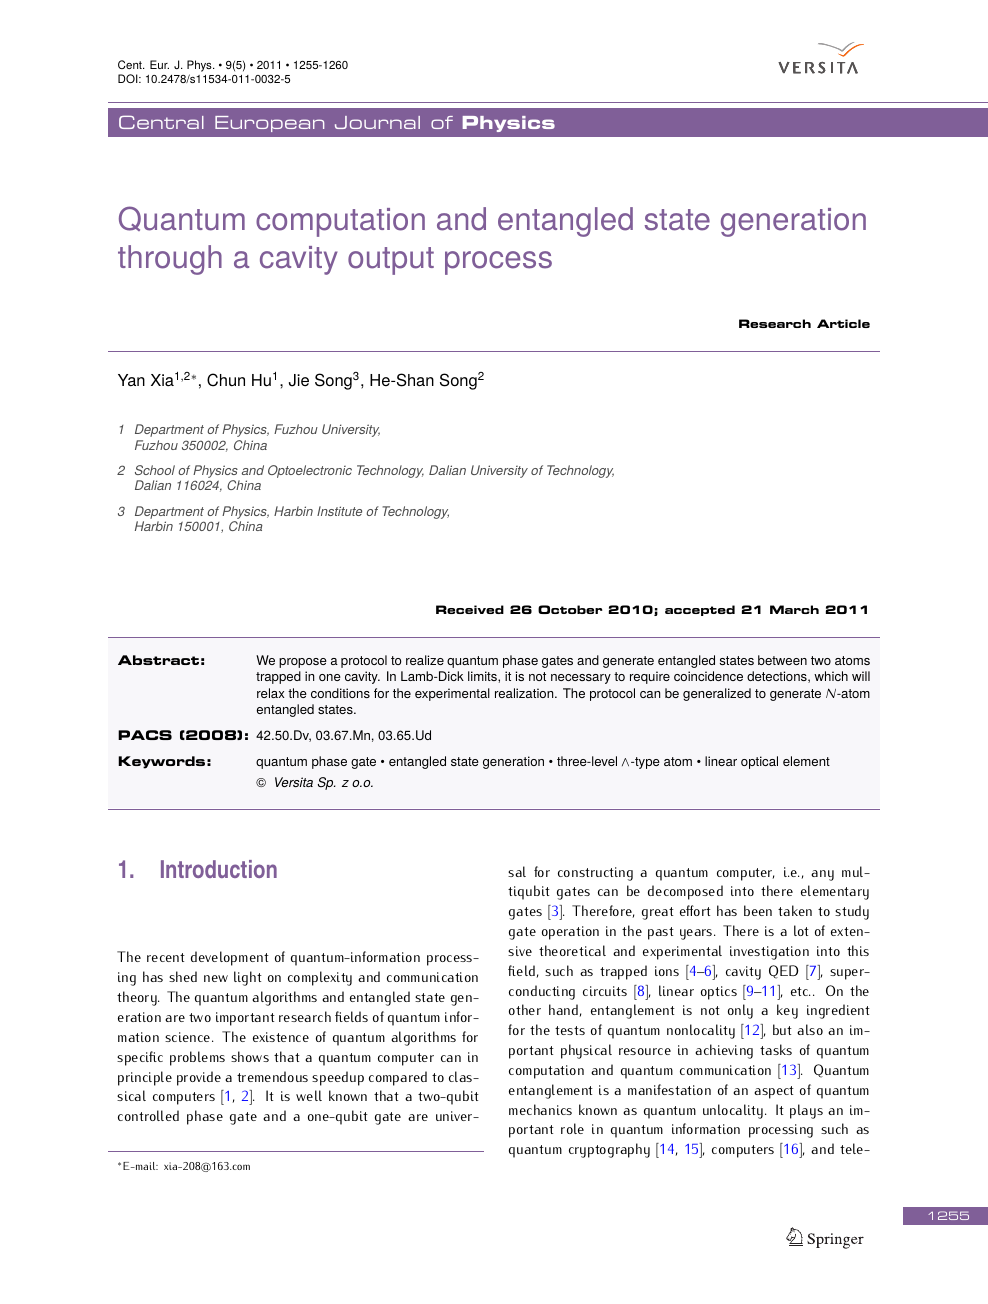 Quantum Computation And Entangled State Generation Through A Cavity Output Process Topic Of Research Paper In Materials Engineering Download Scholarly Article Pdf And Read For Free On Cyberleninka Open Science Hub